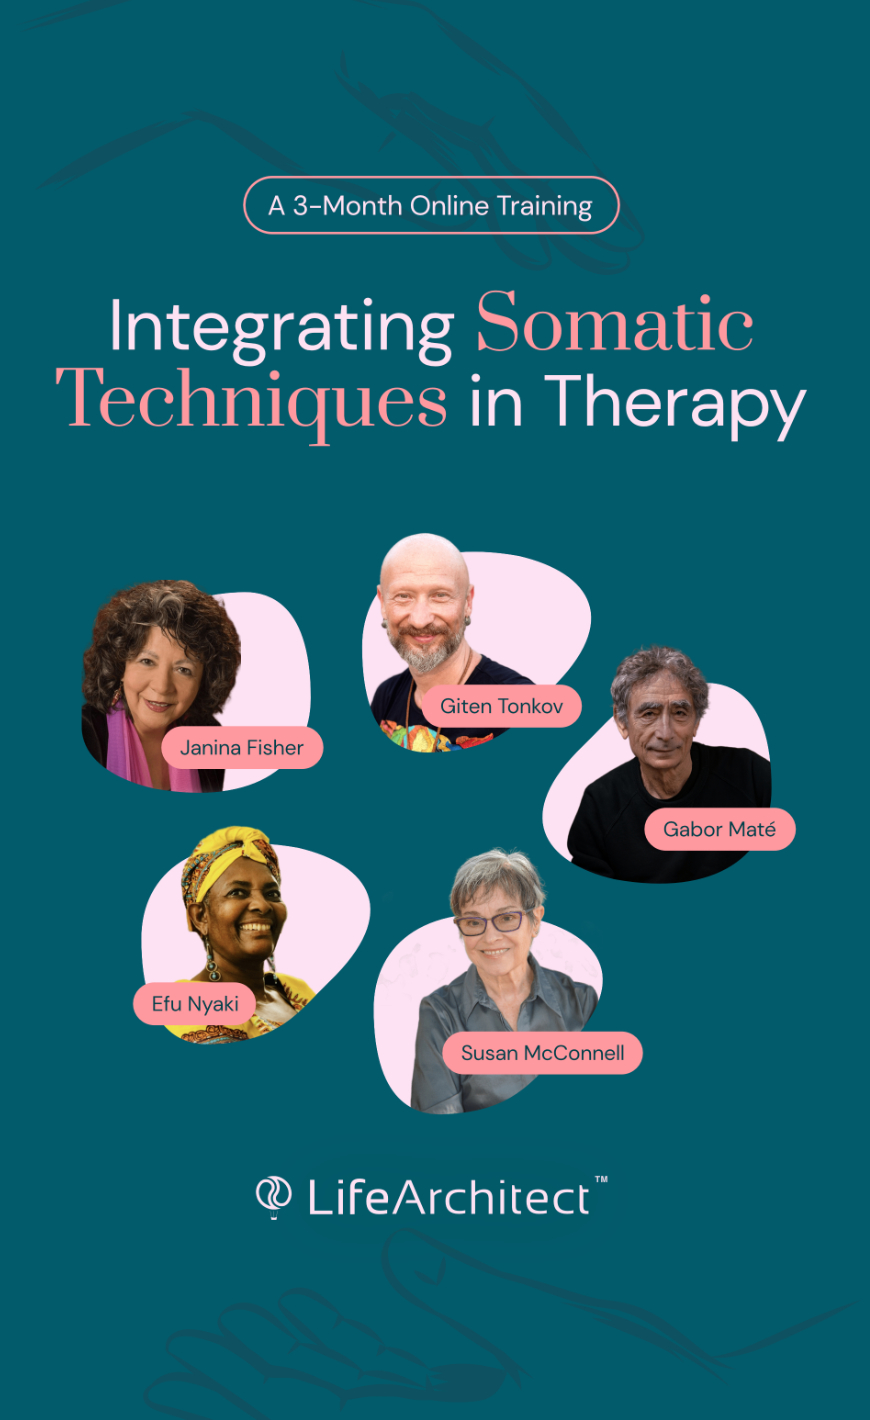 Kurs Integrating Somatic Techniques in Therapy [2nd Installment]